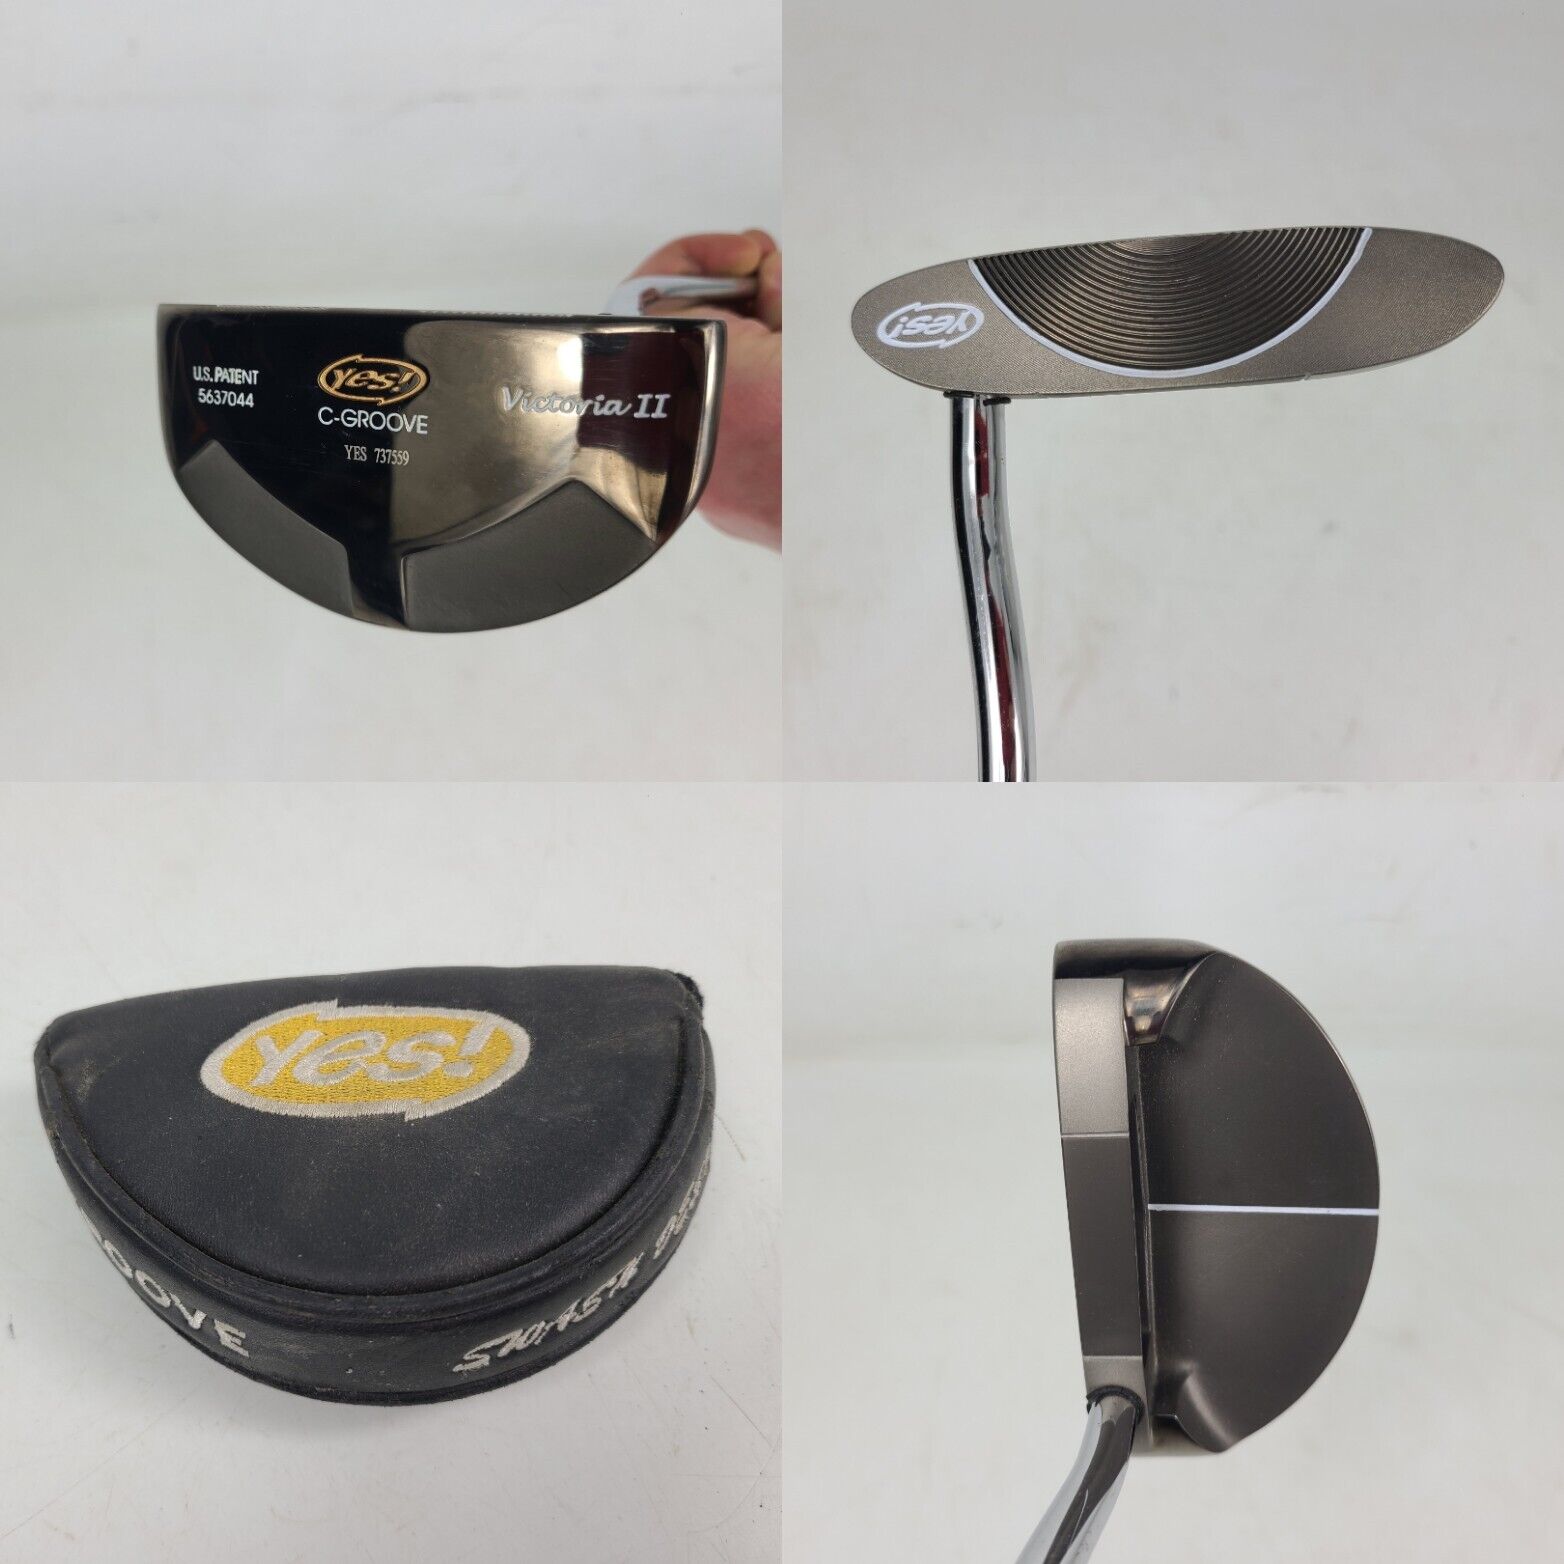 Yes! C-Groove Victoria II Mid-Mallet Putter 35” Right Handed Golf Club